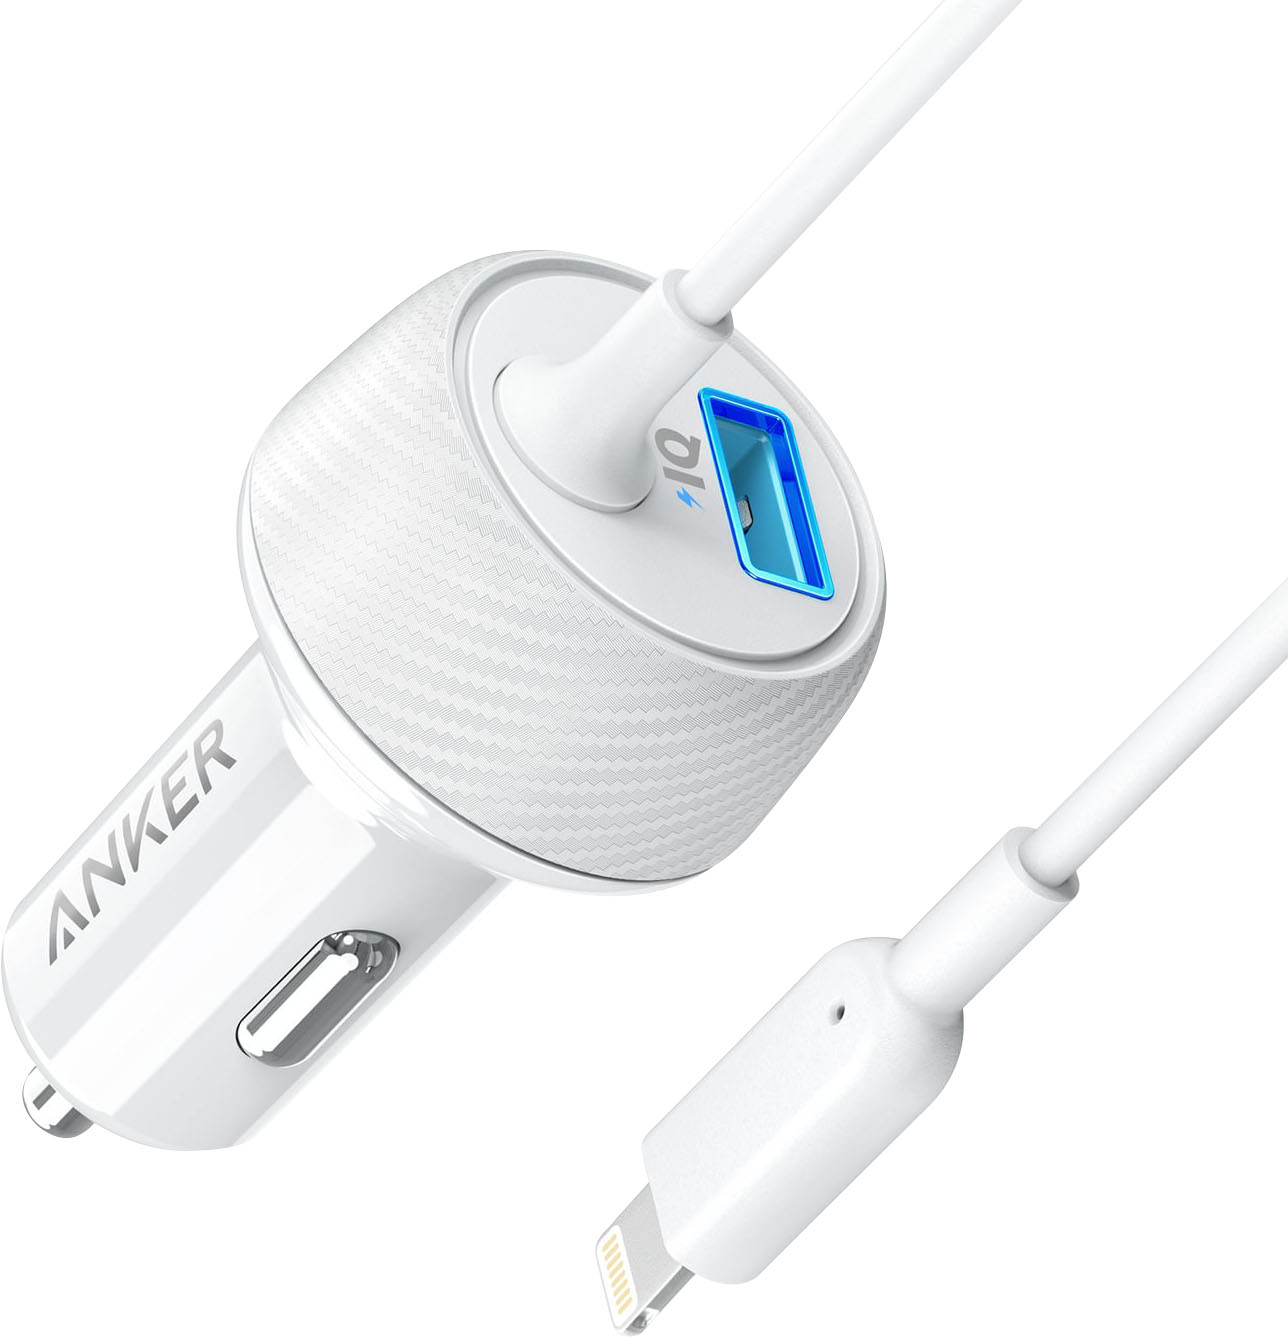 Anker 2-Port Powerdrive 24W Car Charger with Hardwired Lightning Cable - White